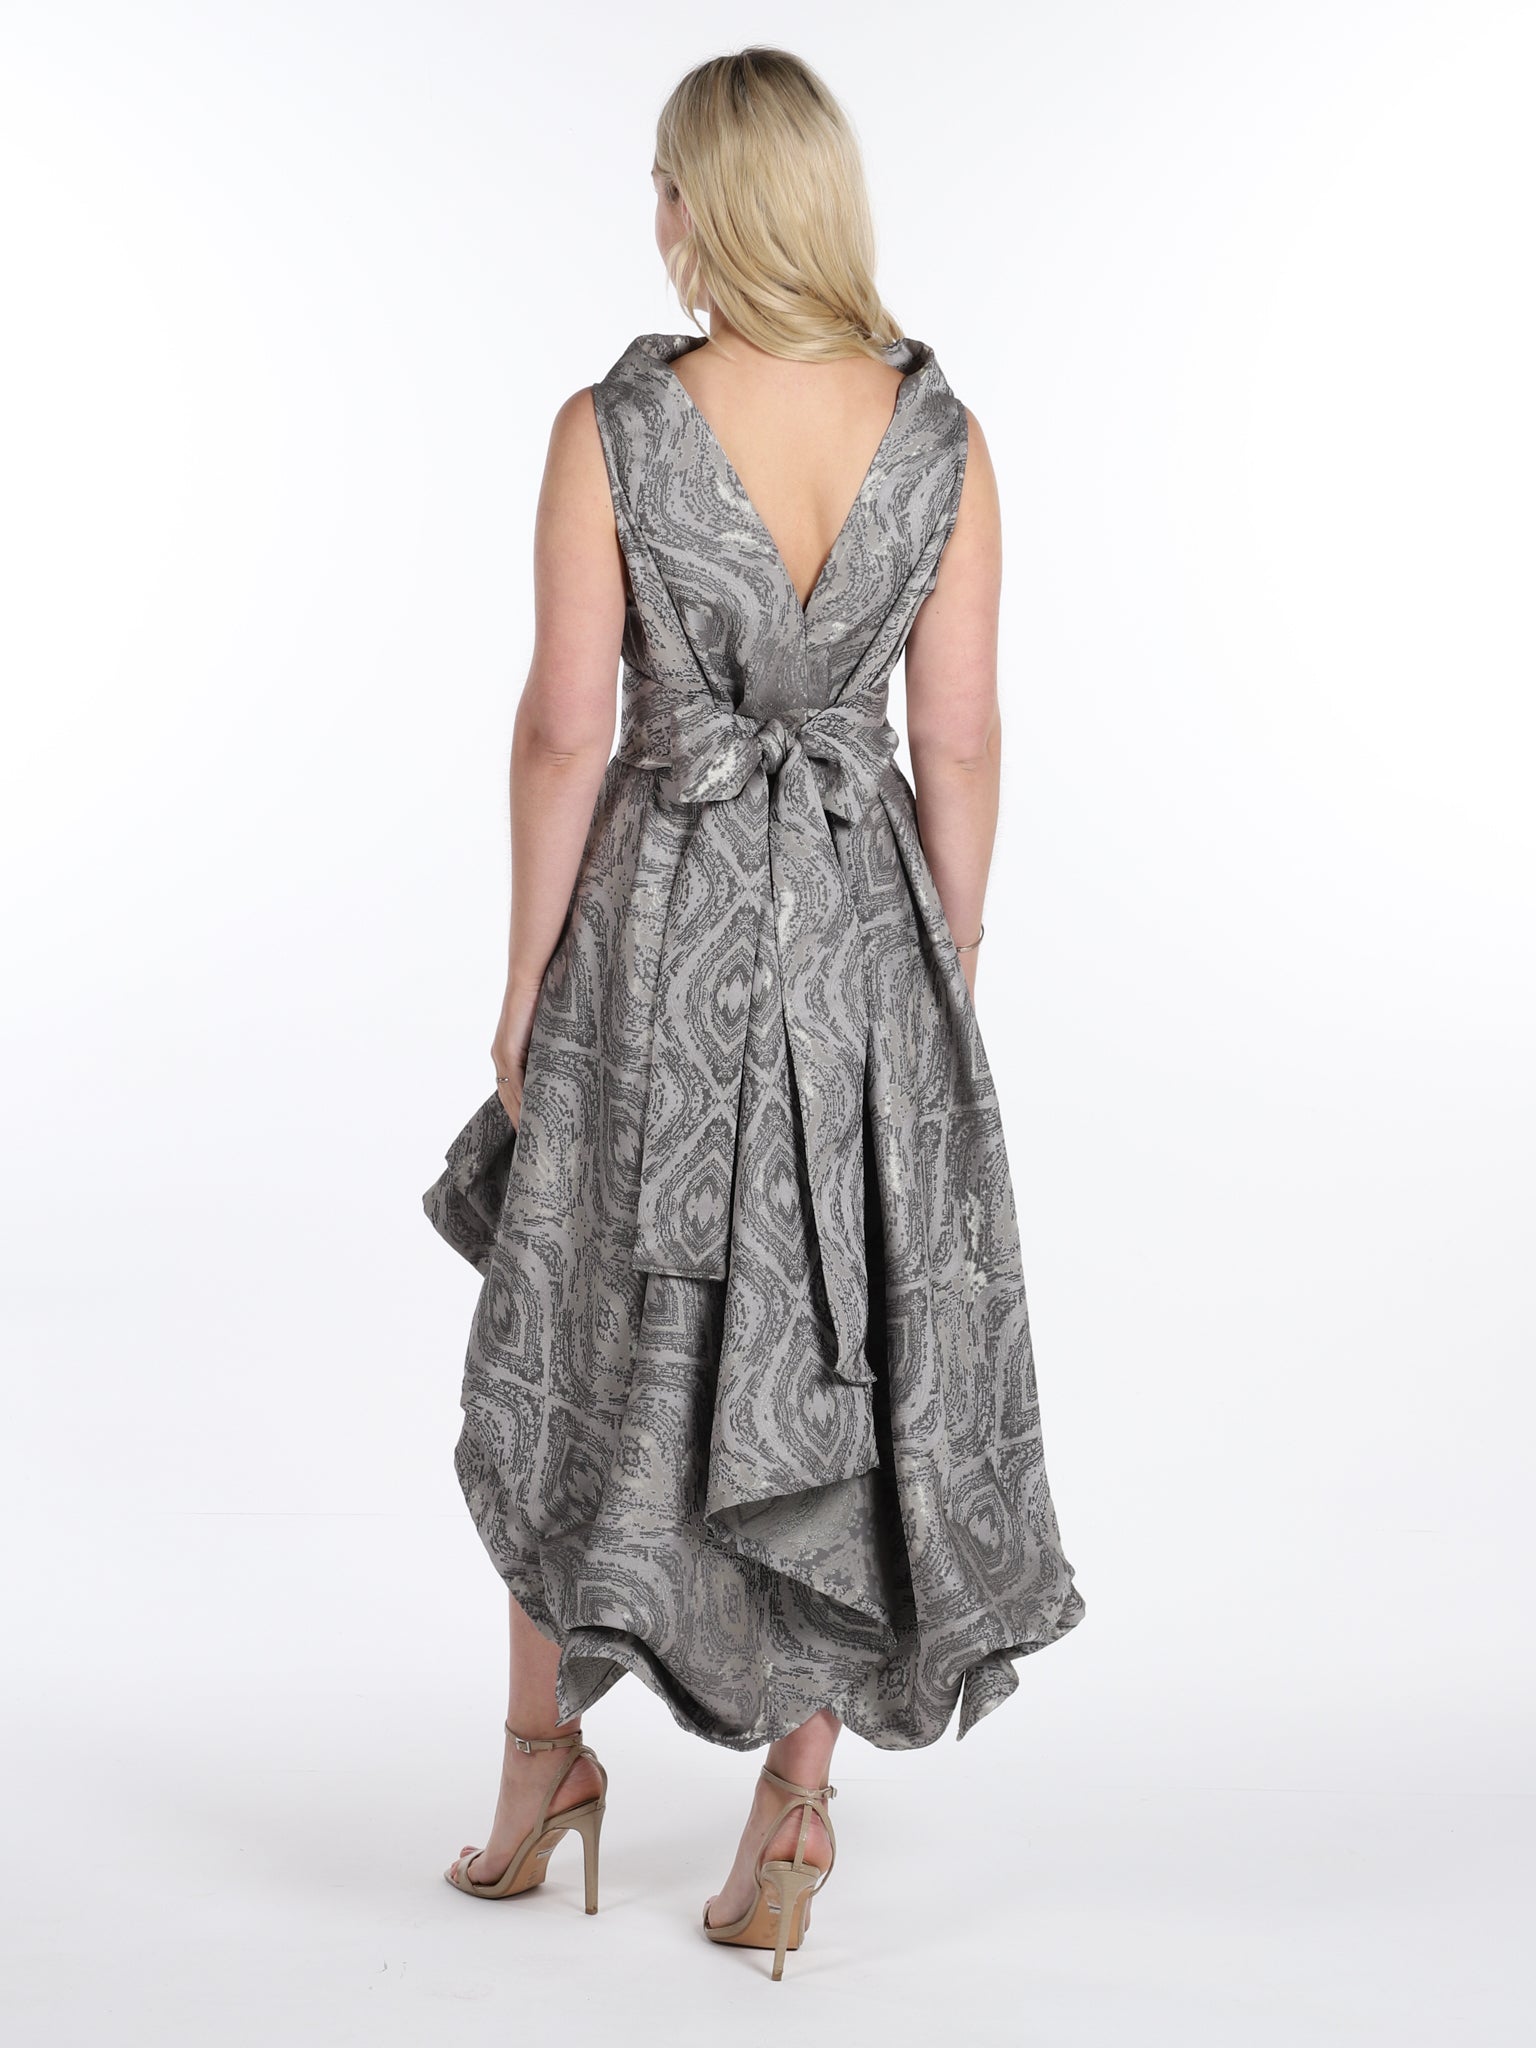 Shades of Silver Wendy Dress